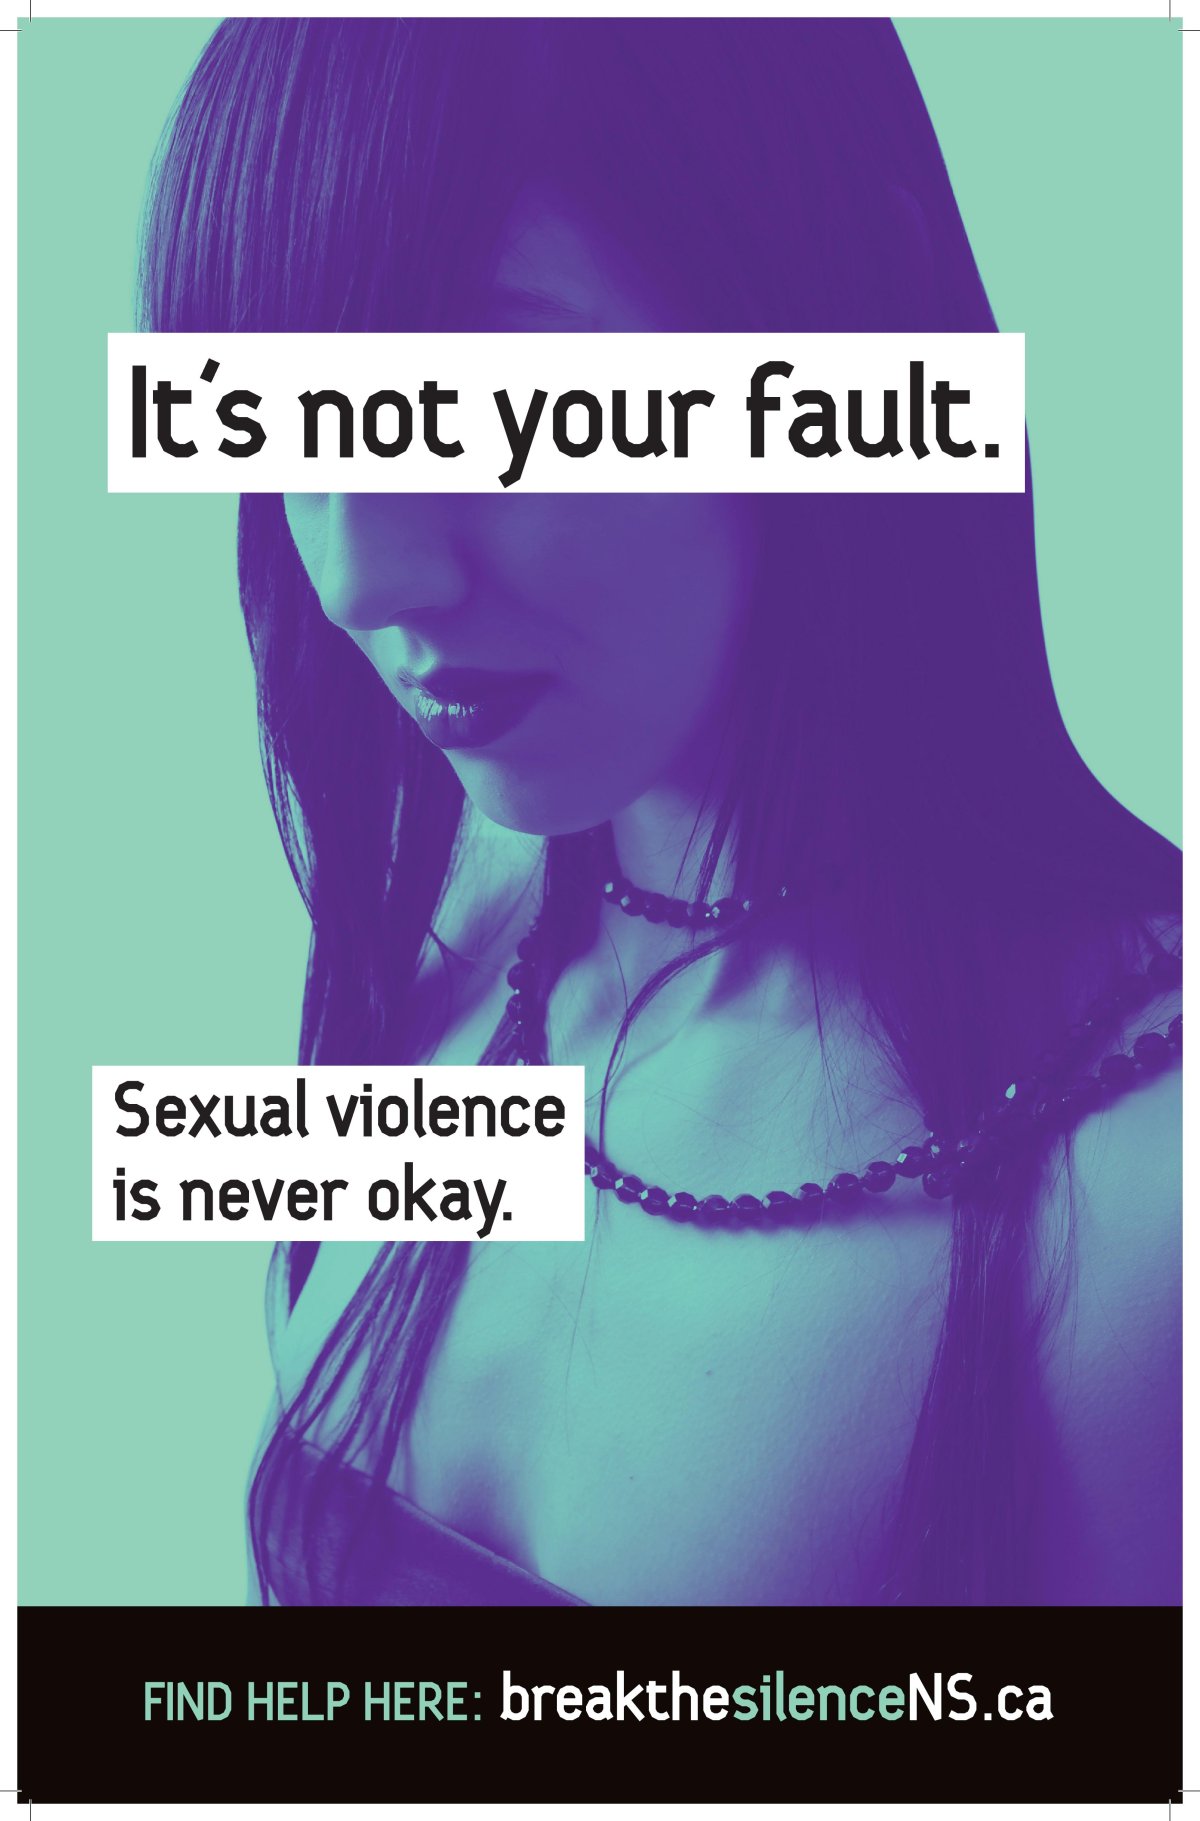 The province has public awareness resources on sexual violence at breakthesilencens.ca.